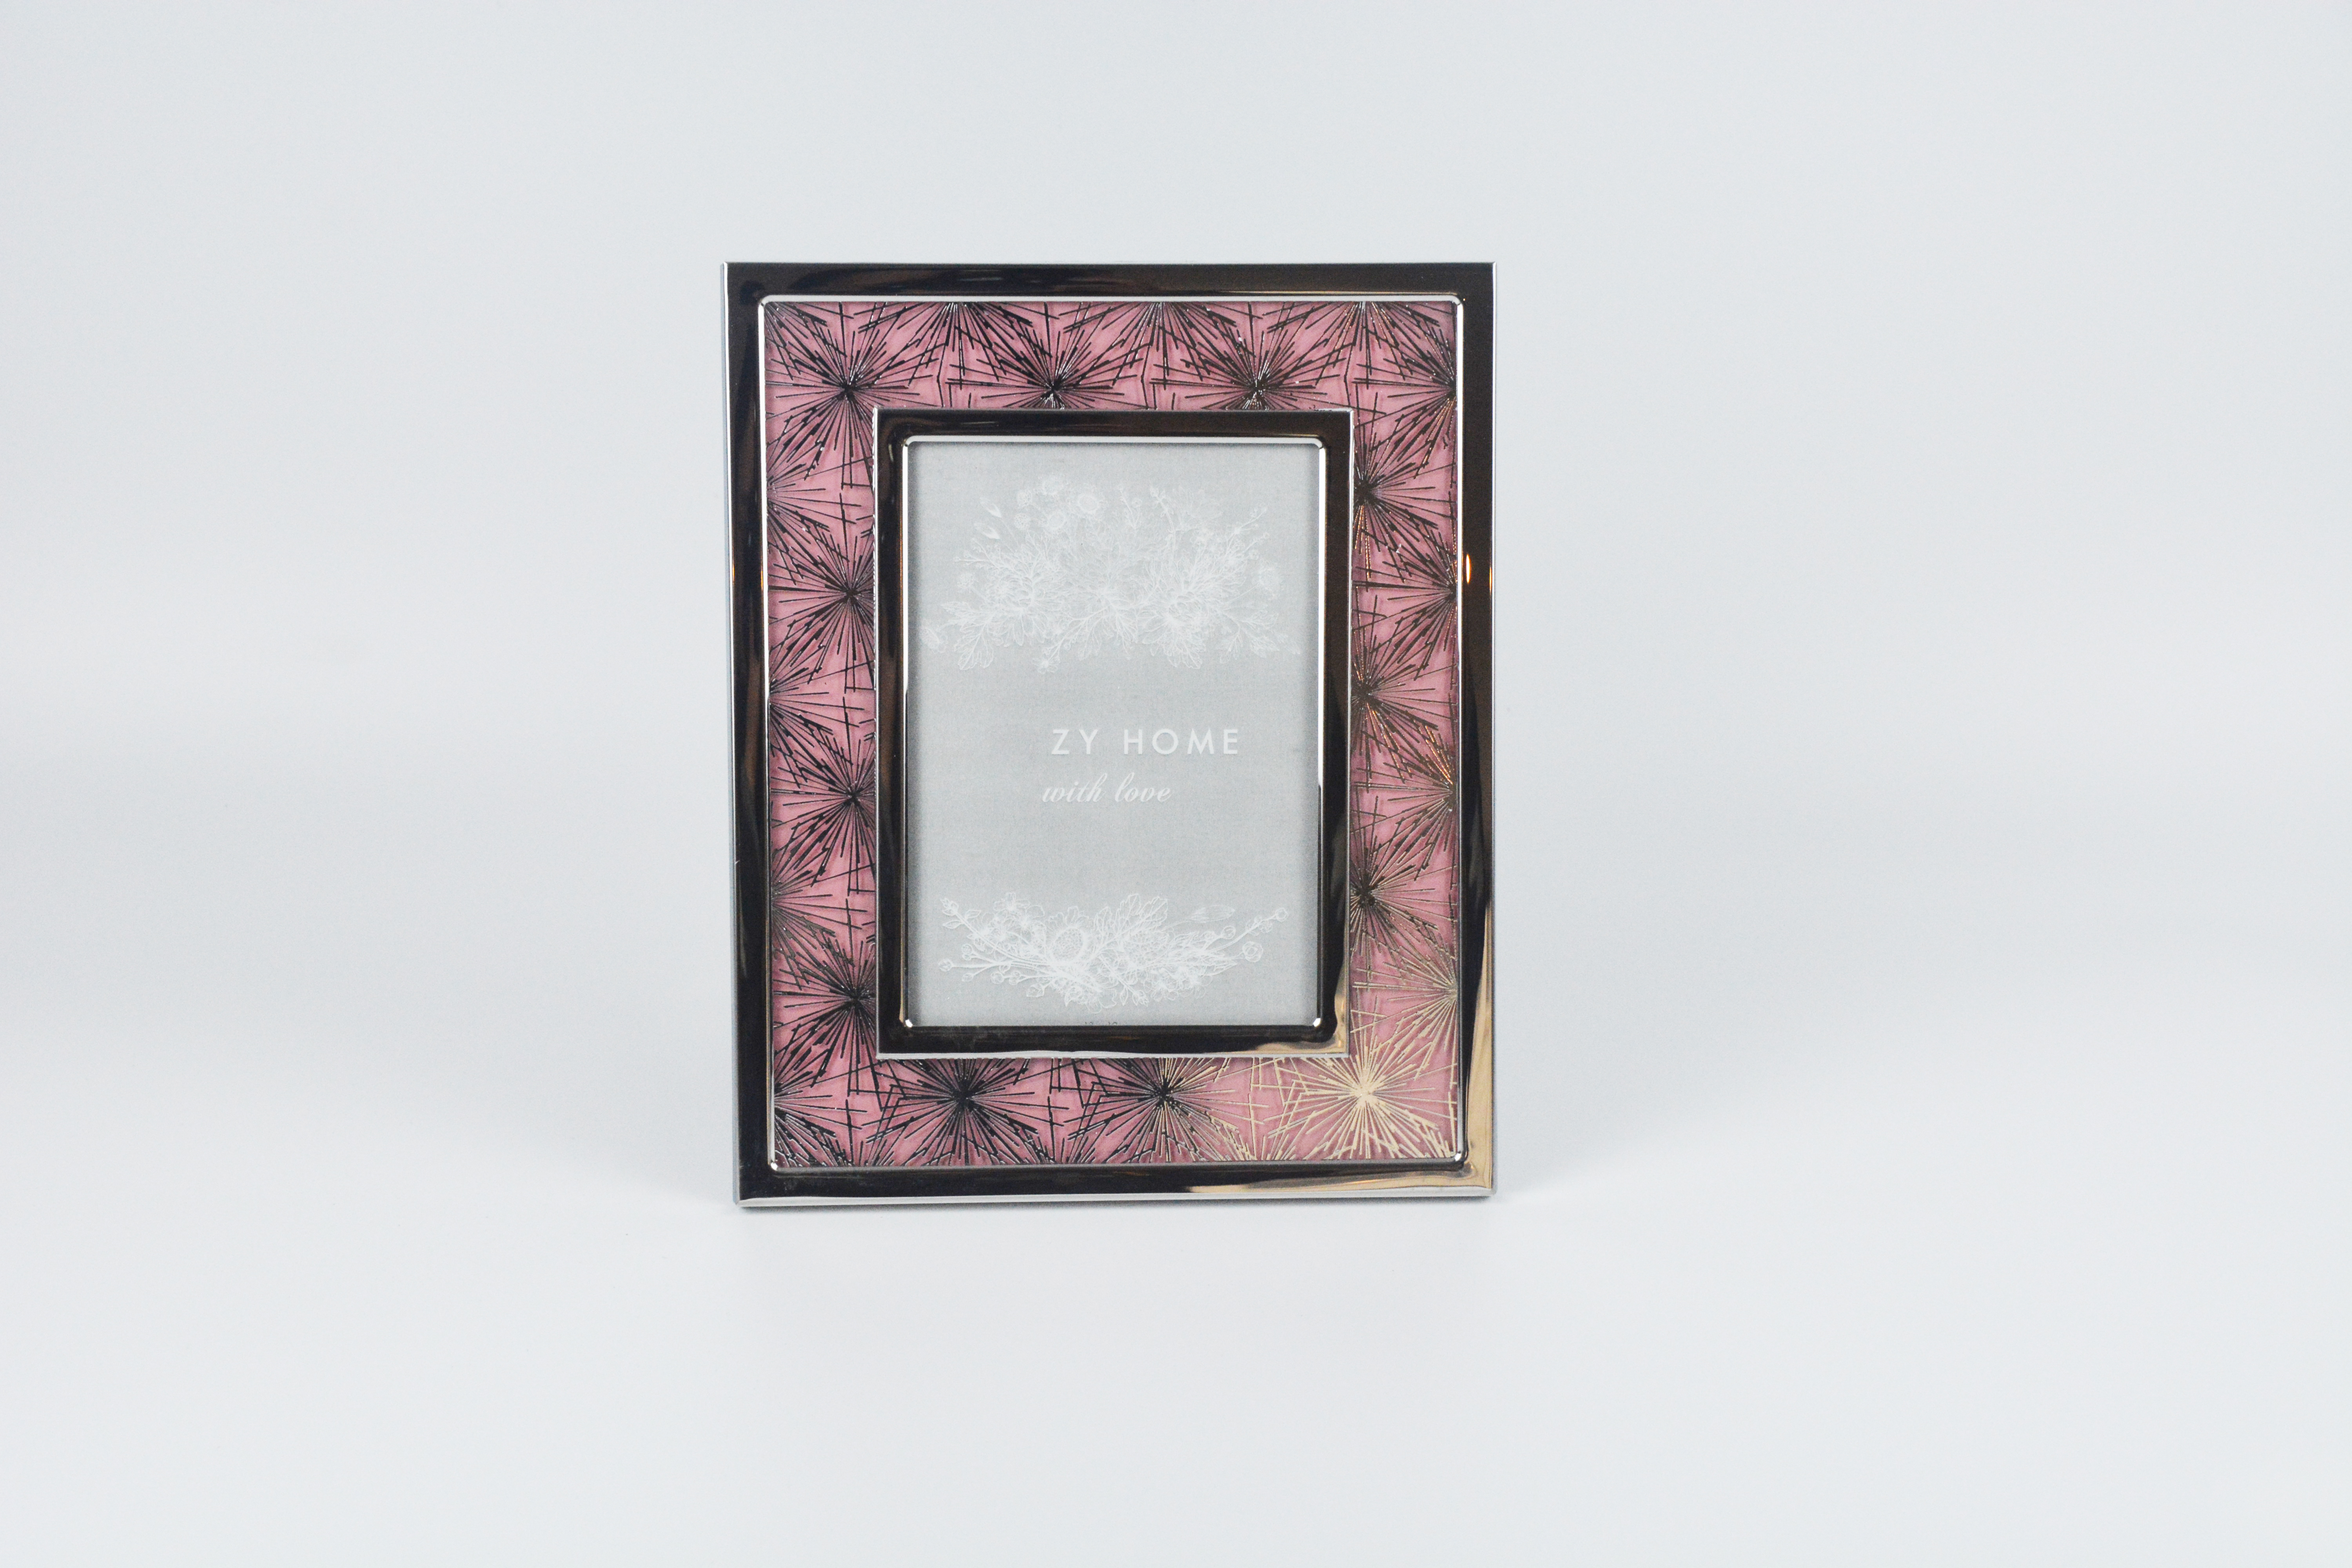 4x6" metal photo frame of pink shiny aluminum alloy 22x27cm decorated